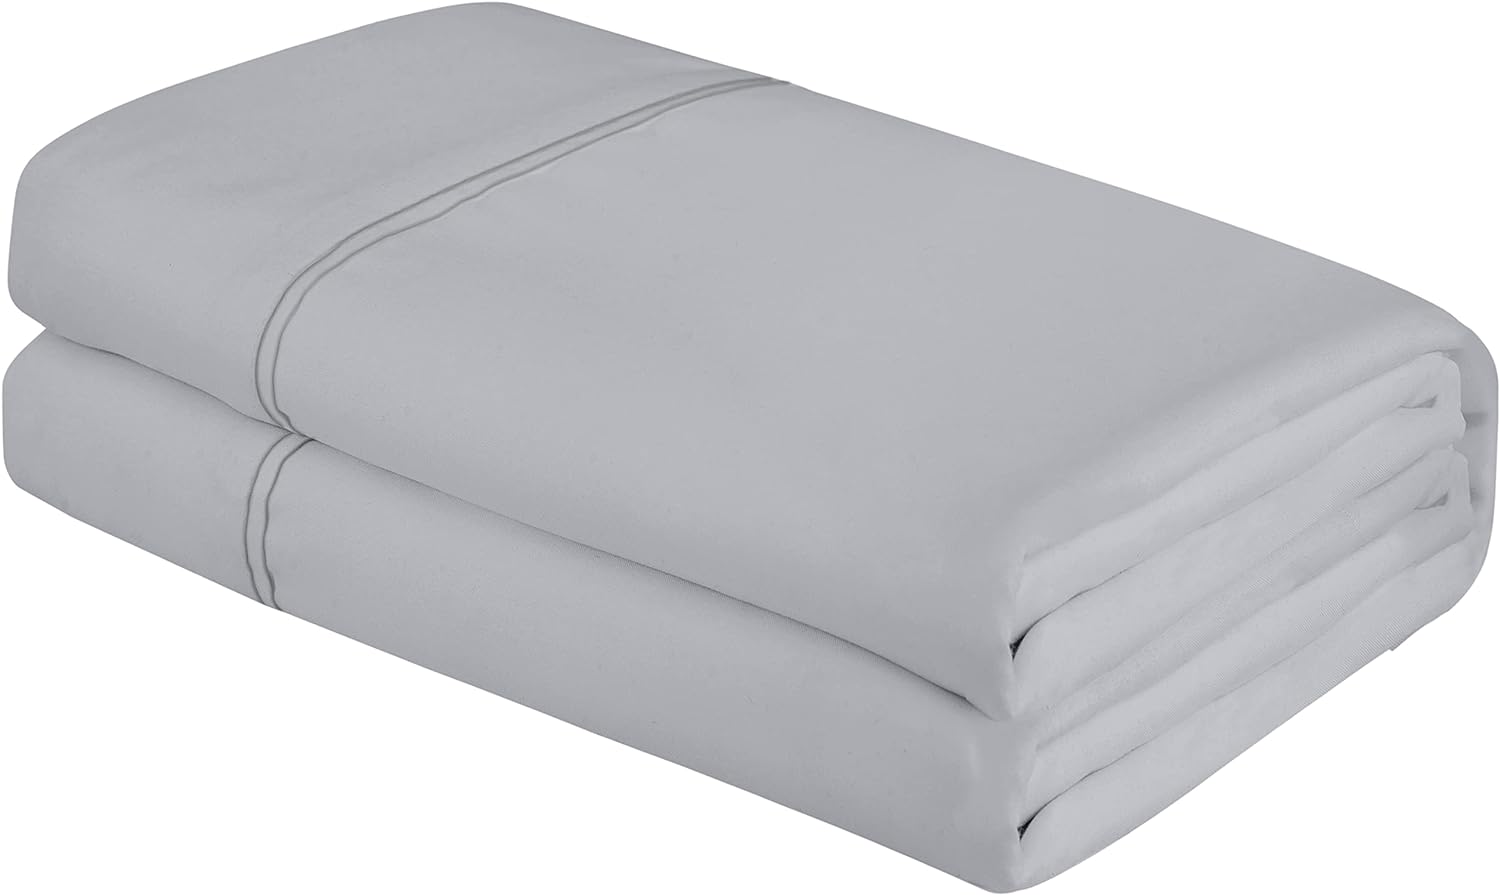 Royale Linens King Size Flat Sheet Only - Brushed 1800 Microfiber - Ultra Soft & Breathable - Wrinkle & Stain Resistant - Hotel Quality Flat Sheet Sold Separately - Top Sheet for Bed - (King, Silver)